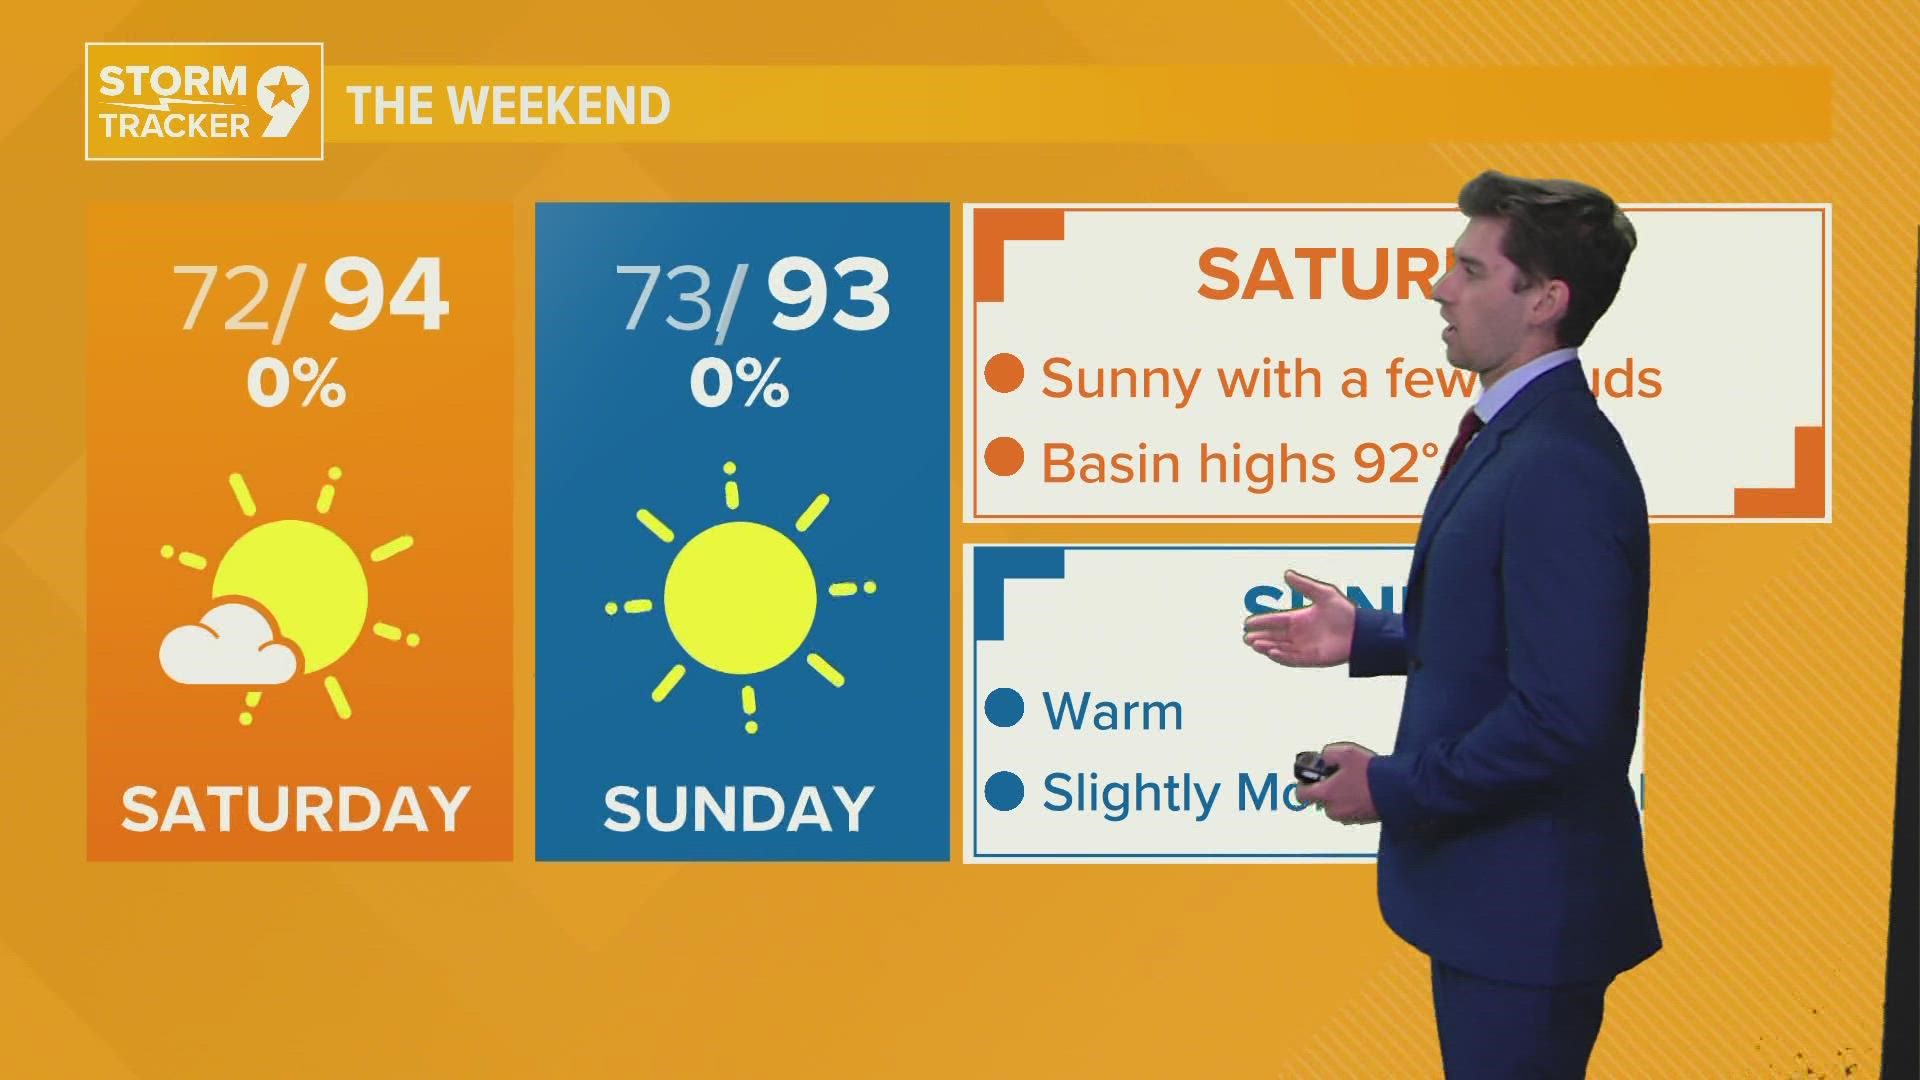 Cooler weather continues for a nice weekend